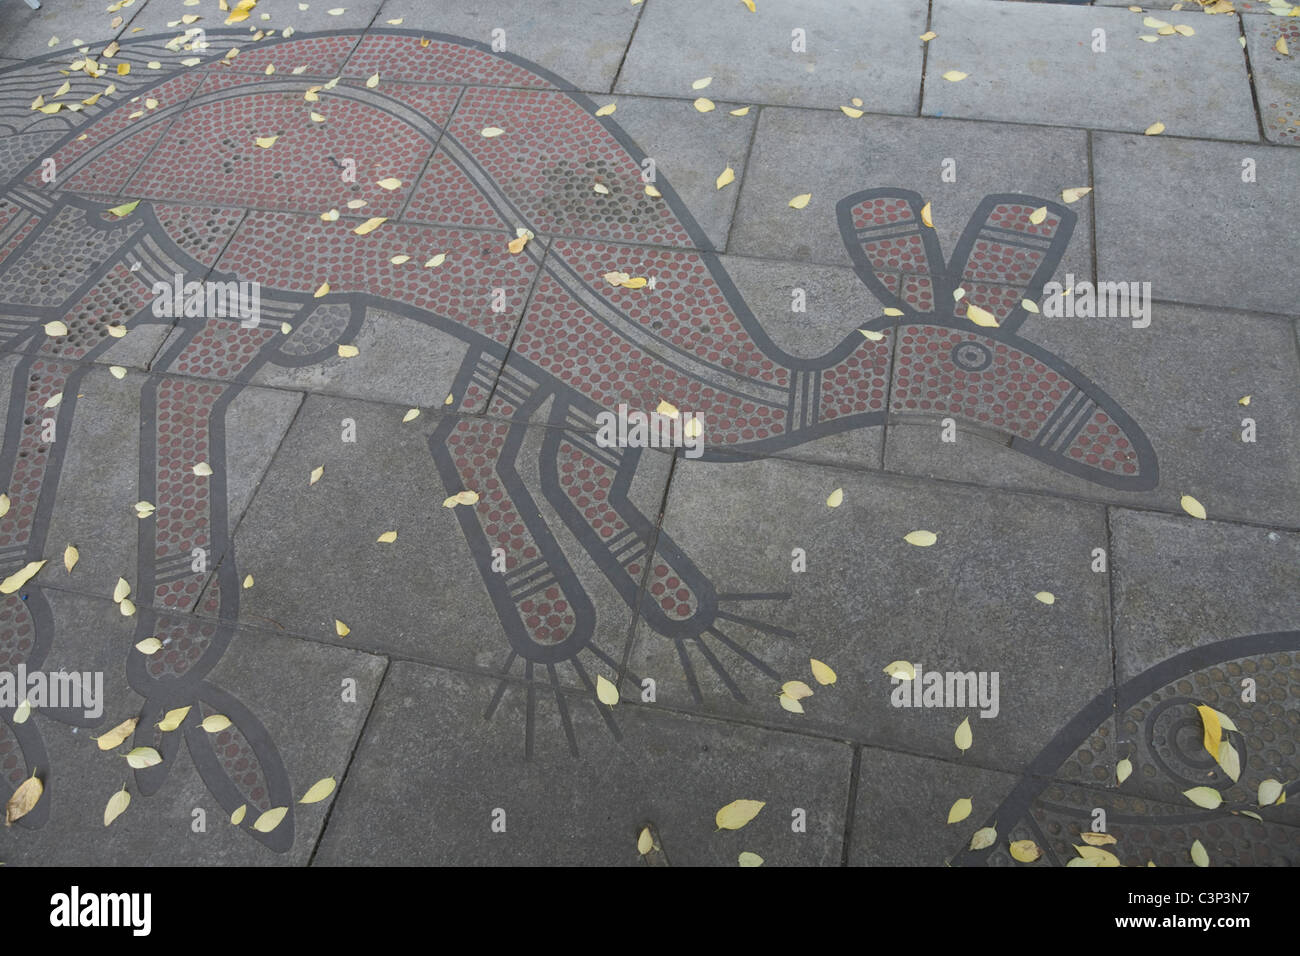 A Kangaroo depicted in Aboriginal style on a street pavement in Adelaide Australia Stock Photo